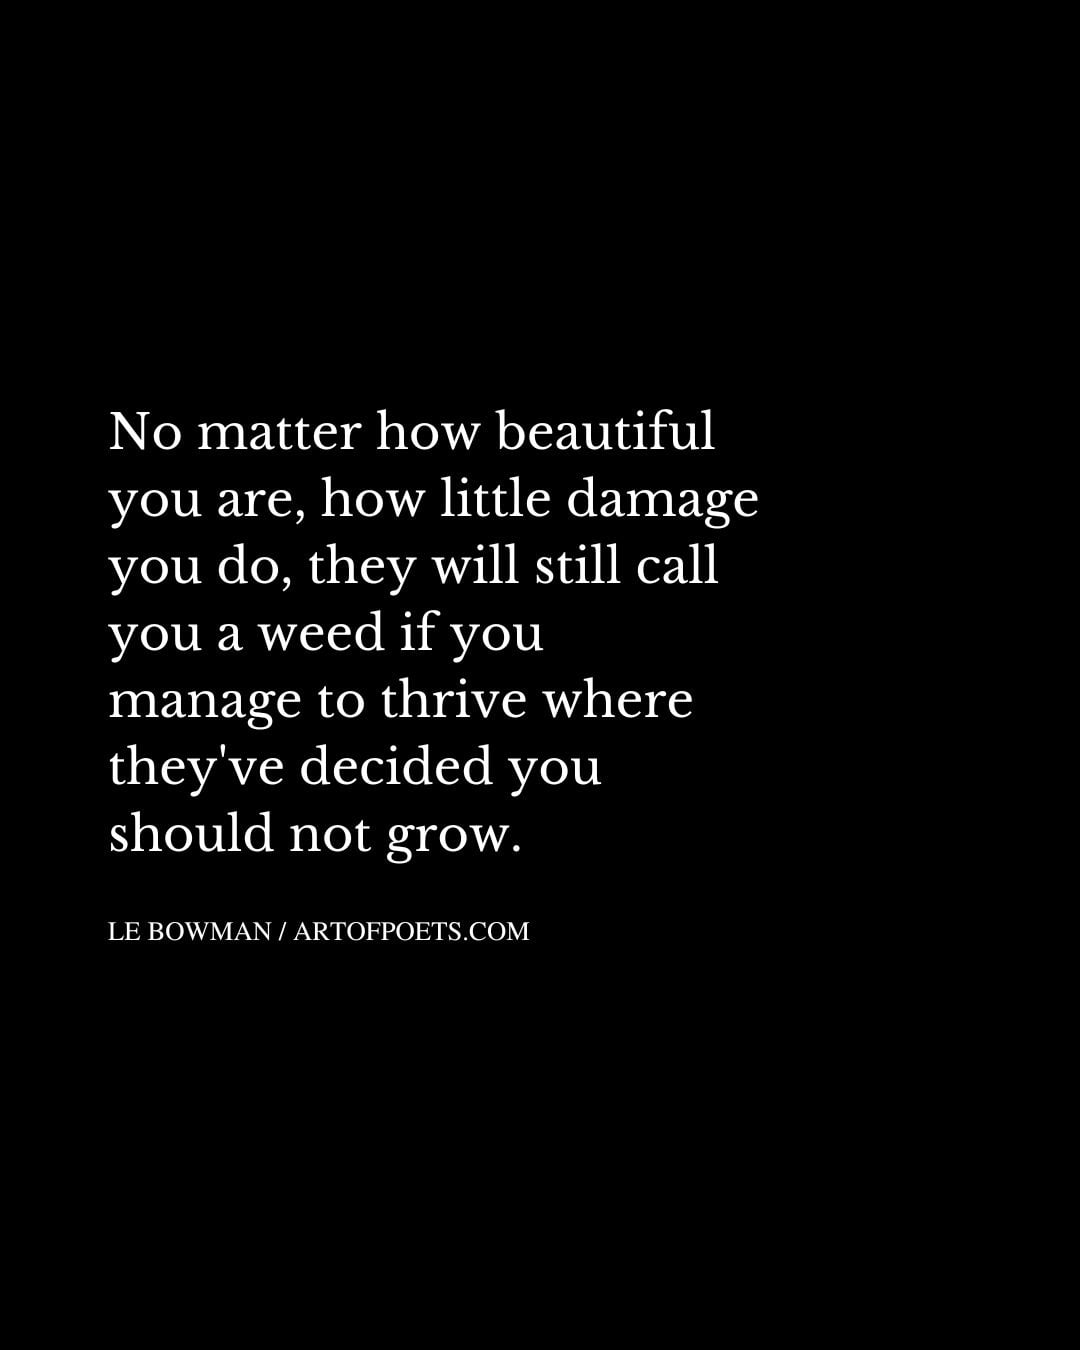 No matter how beautiful you are how little damage you do they will still call